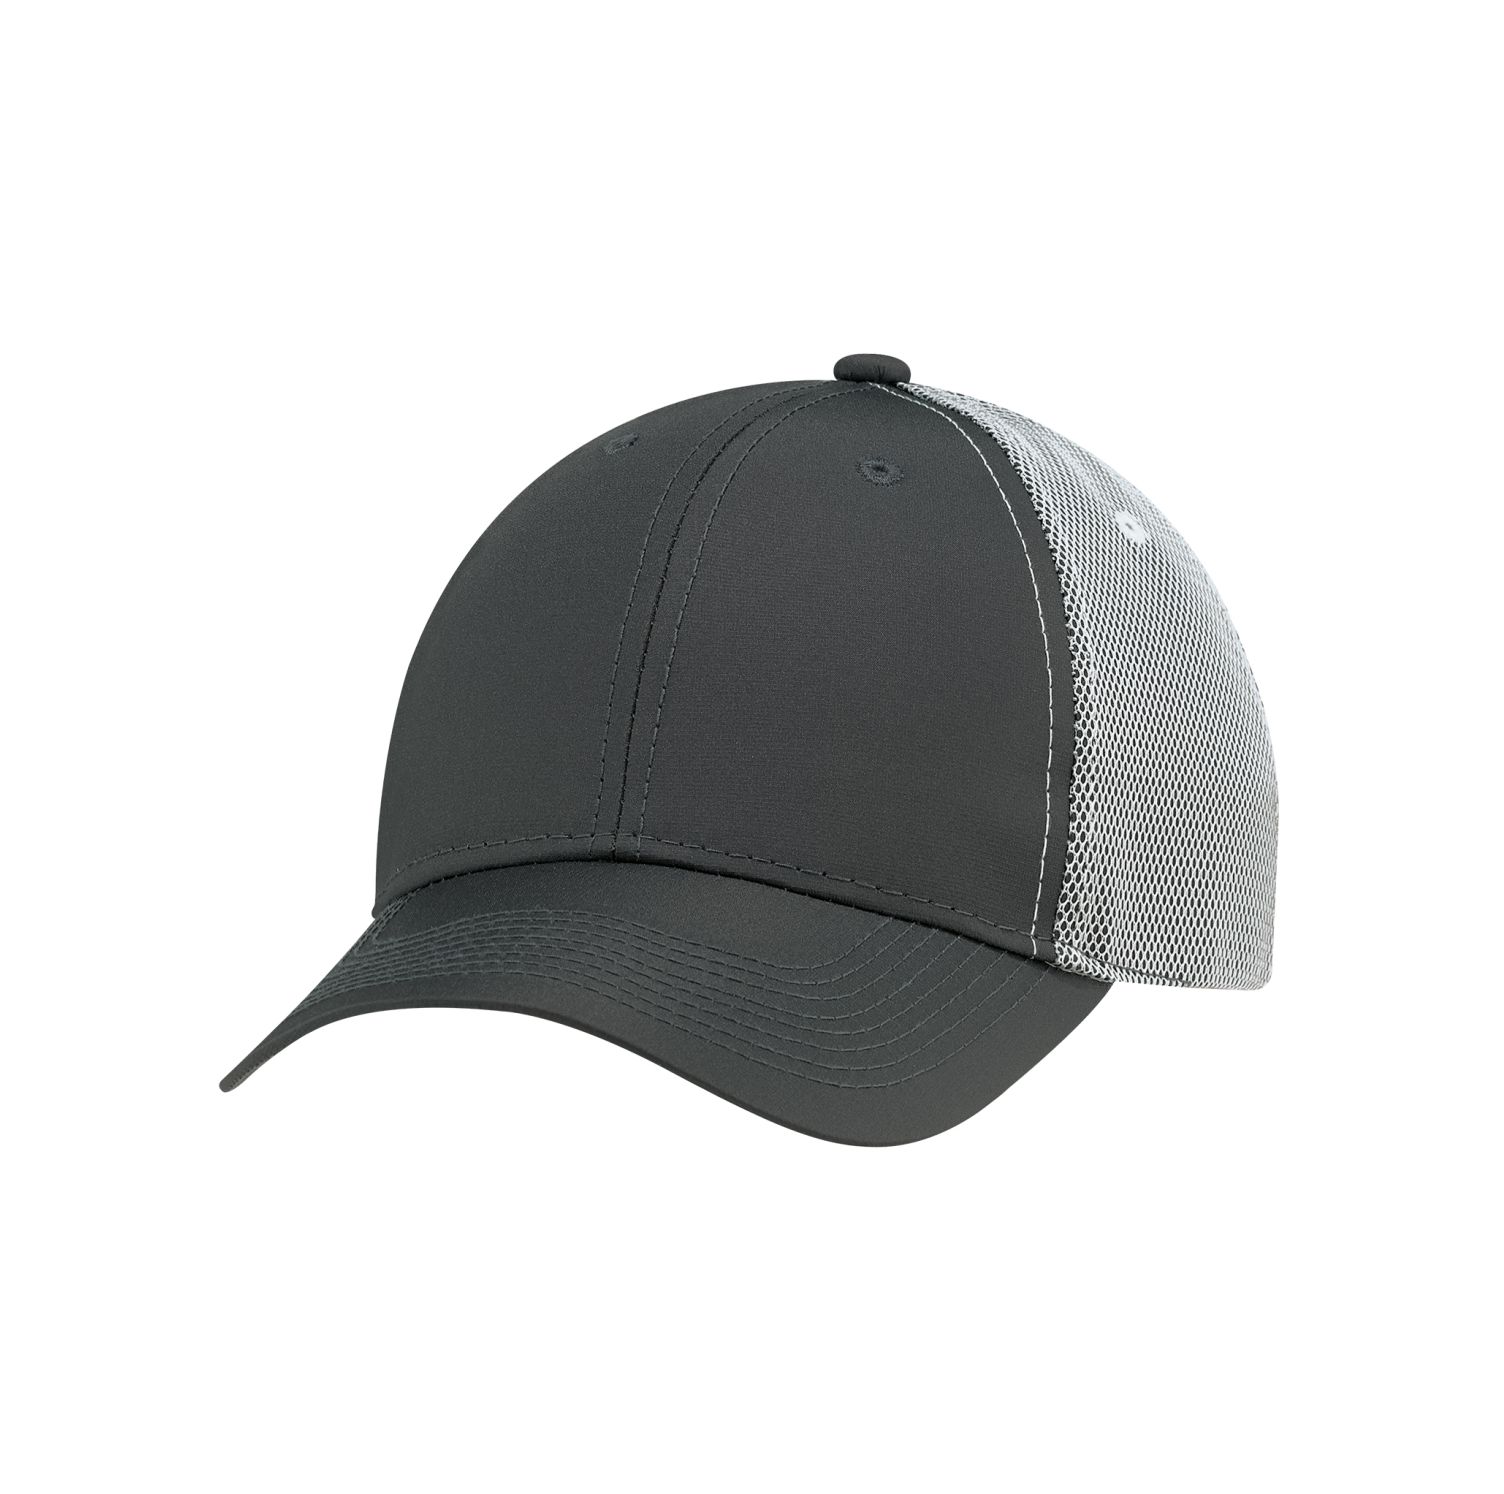 AJM Polyester Rip Stop / Polyester Rip Stop Bonded Mesh 6 Panel Constructed Full-Fit Hat #1B637M Charcoal / White